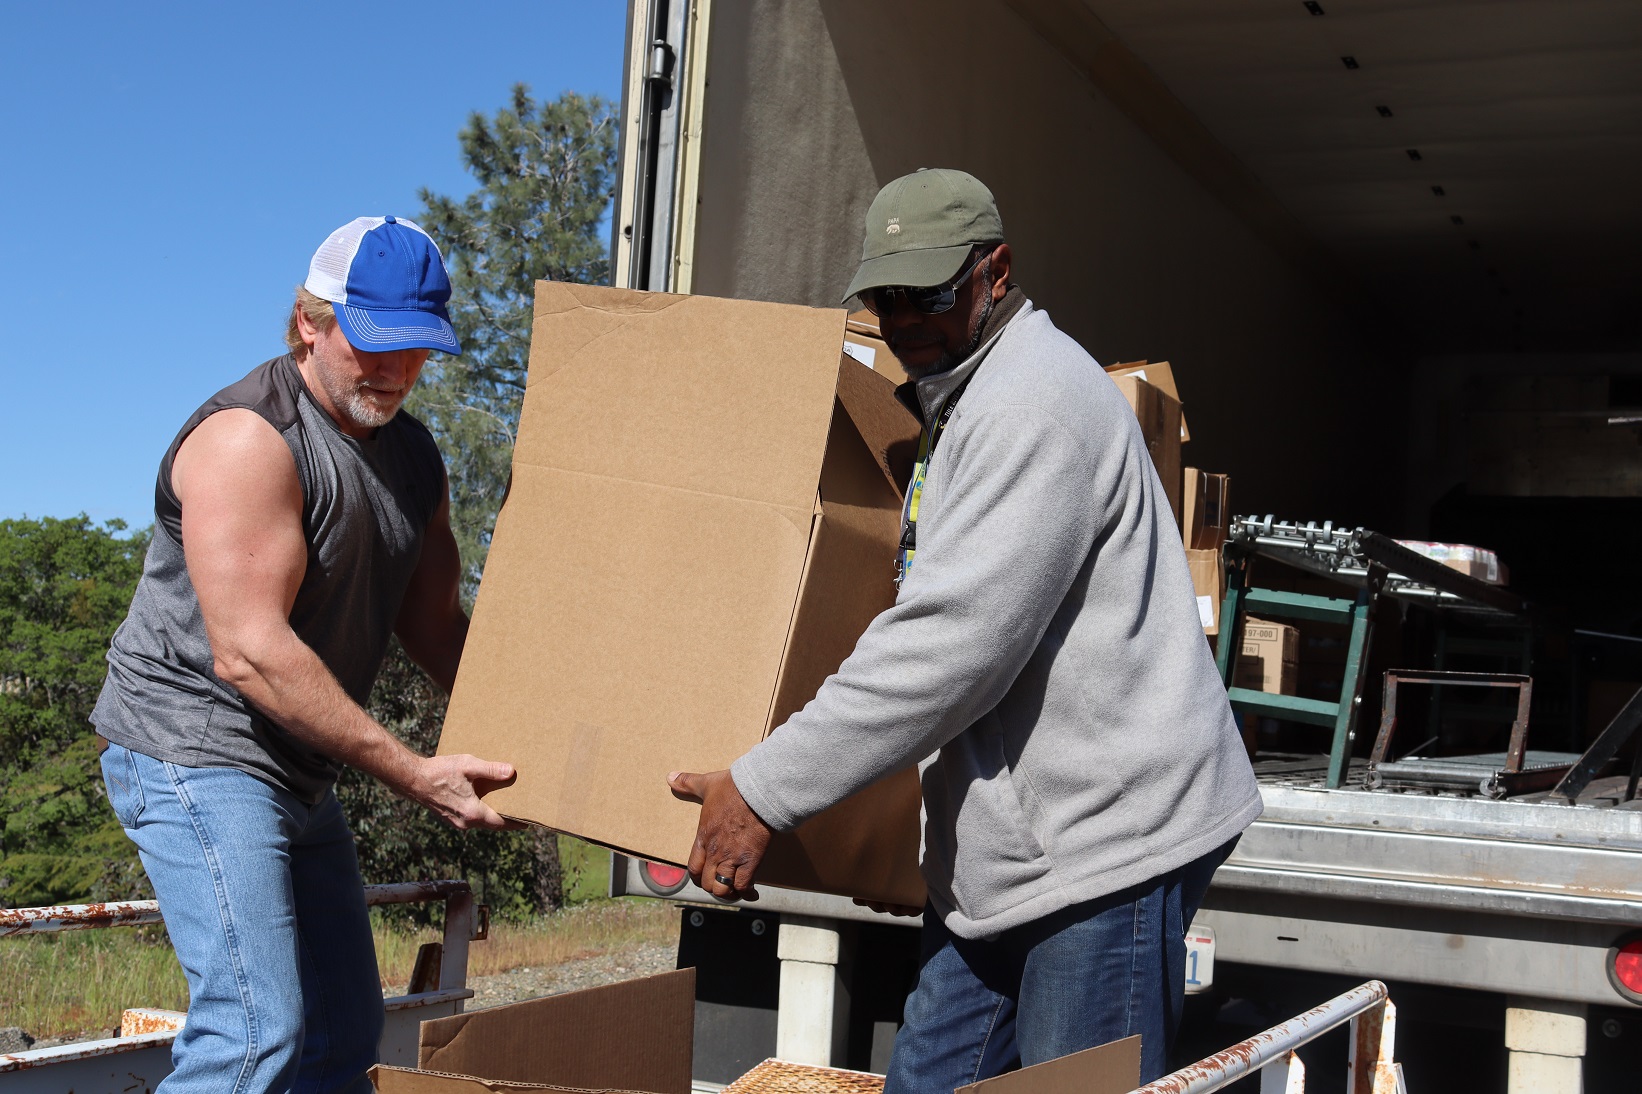 Ronald Buckman and Tiger Paulk unloading big boxes during a food distribution for the California Valley Miwok Tribe.